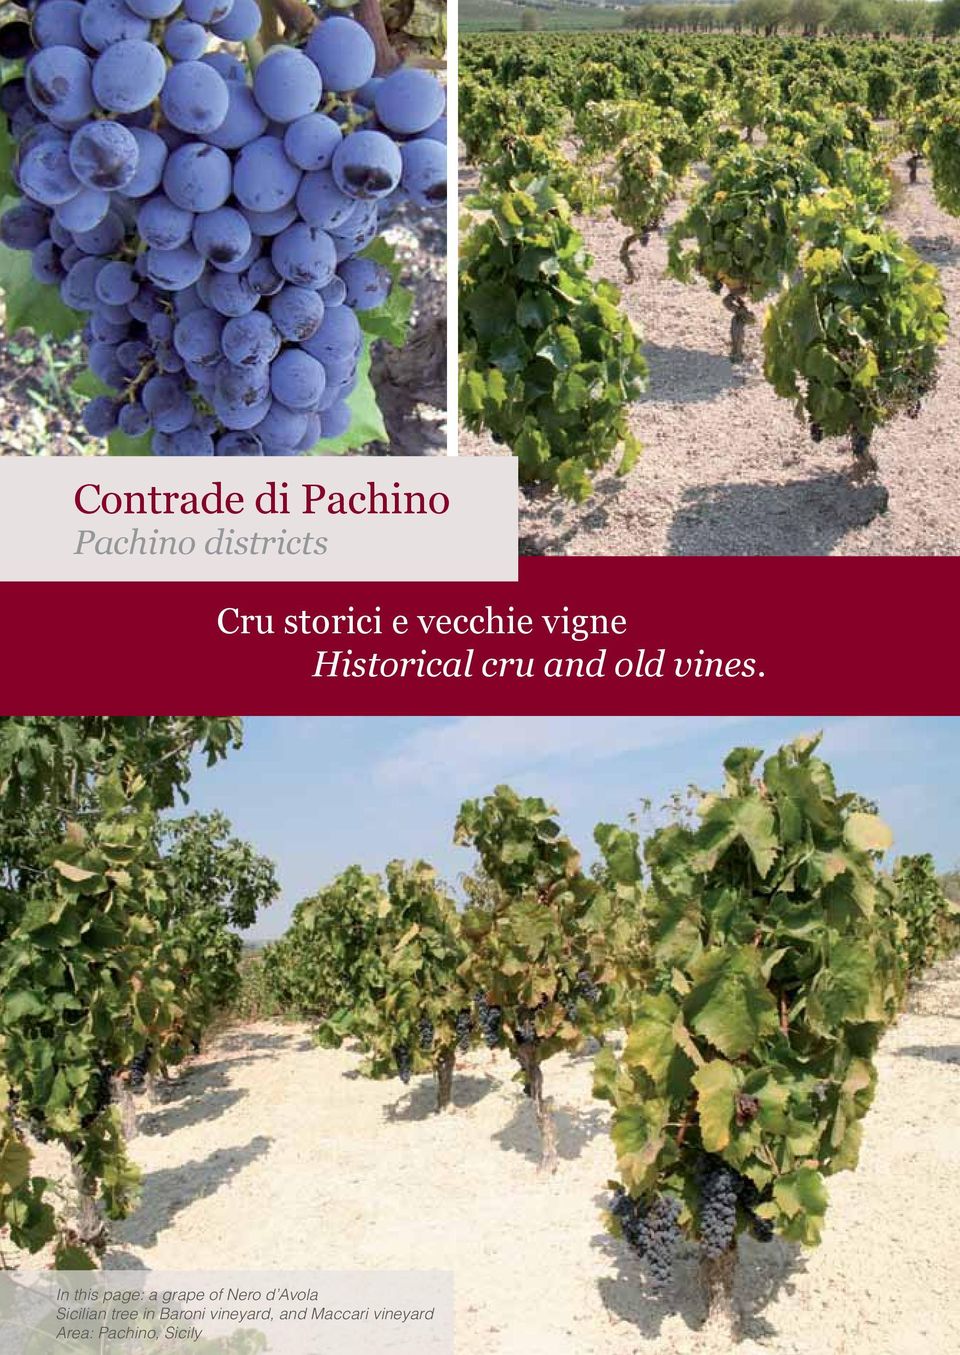 In this page: a grape of Nero d Avola Sicilian tree